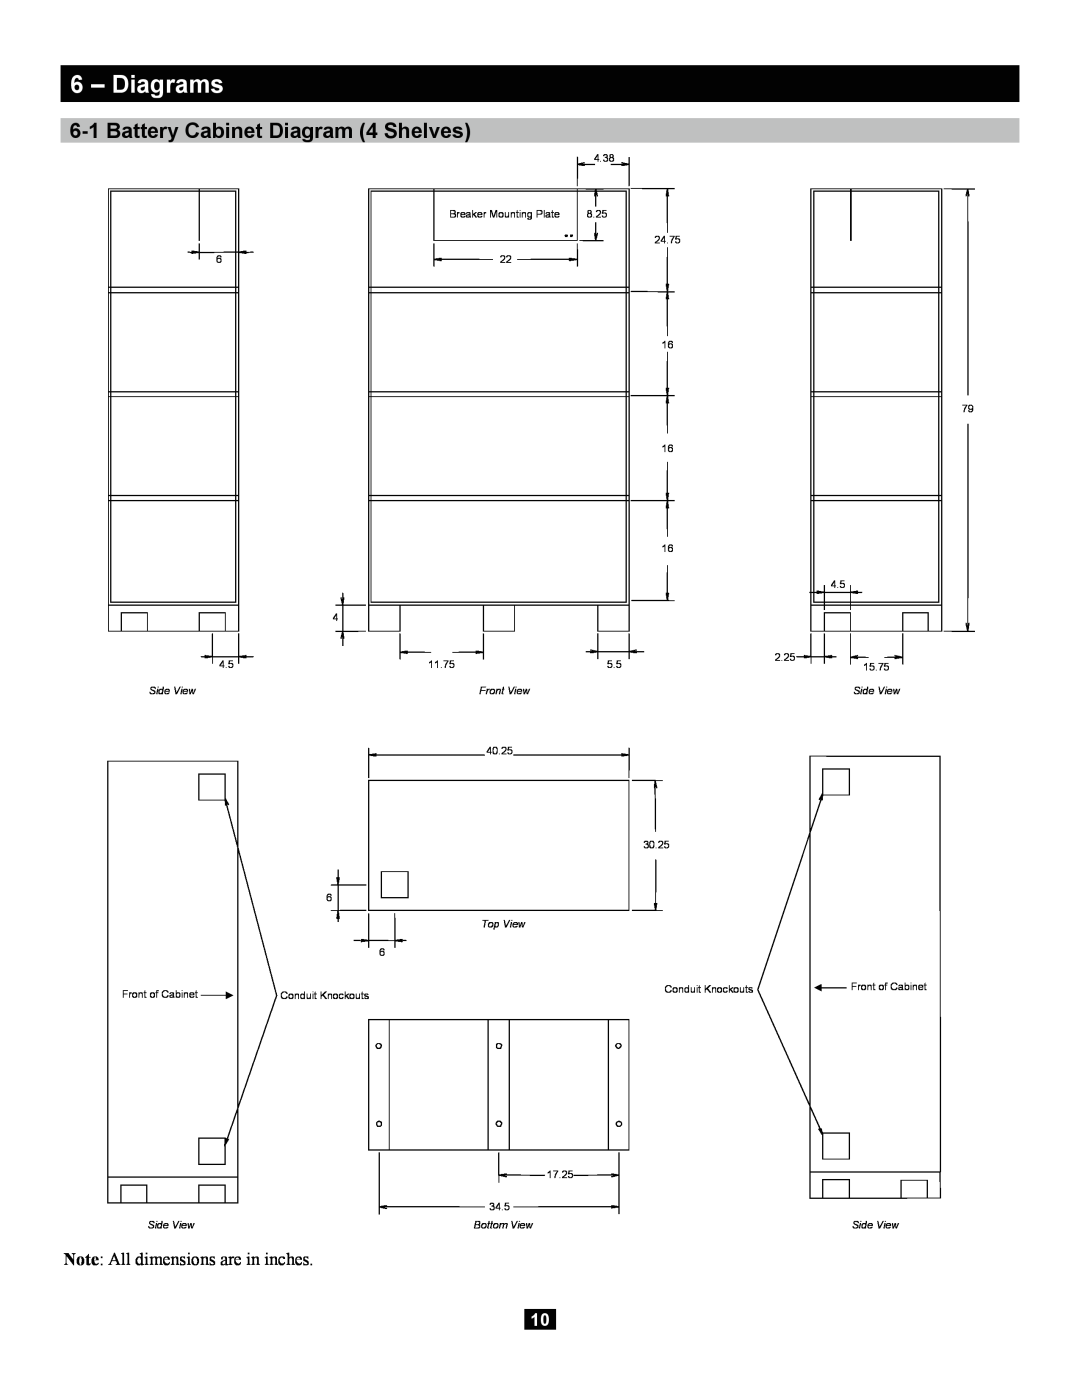 Tripp Lite Extended-Run 3-Phase Battery Cabinet Diagrams, Battery Cabinet Diagram 4 Shelves, Side View, Front View 